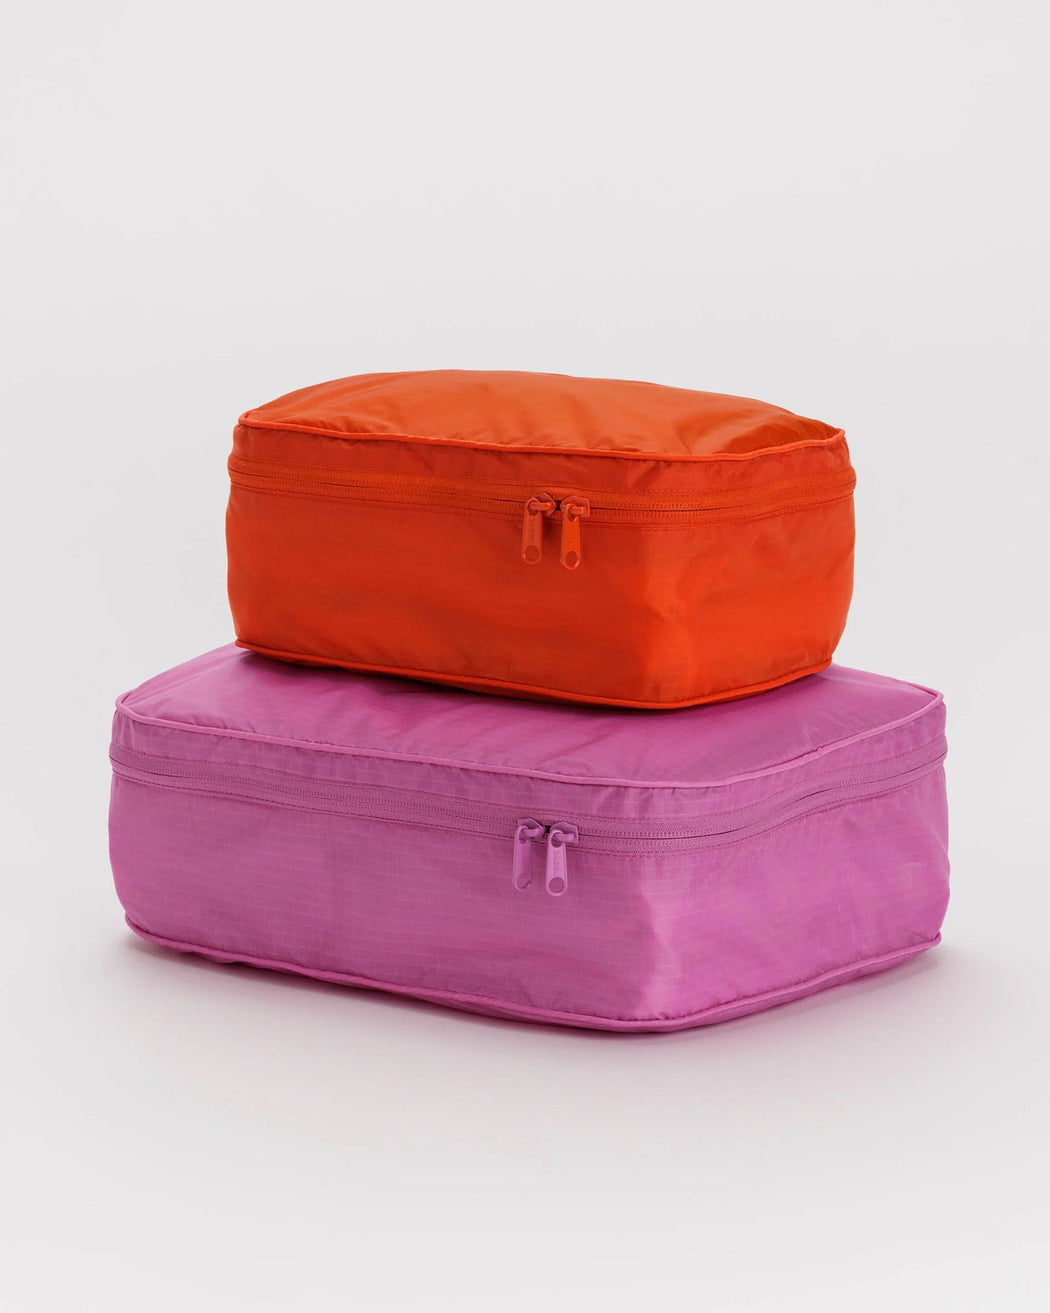 Packing Cube Set – Assorted Colors